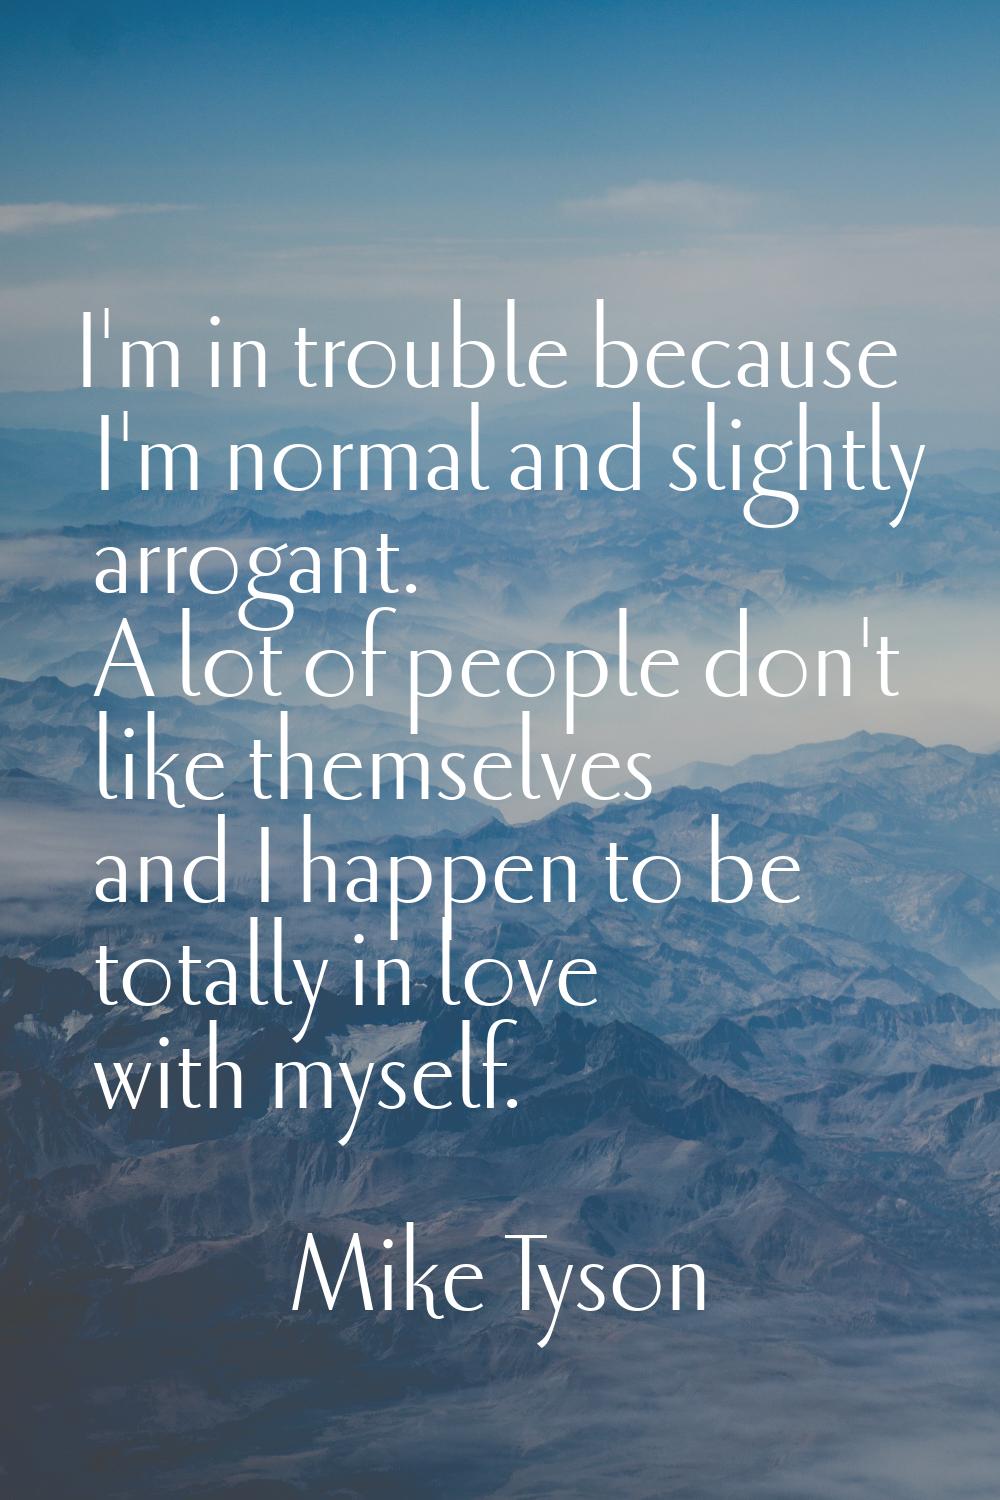 I'm in trouble because I'm normal and slightly arrogant. A lot of people don't like themselves and 